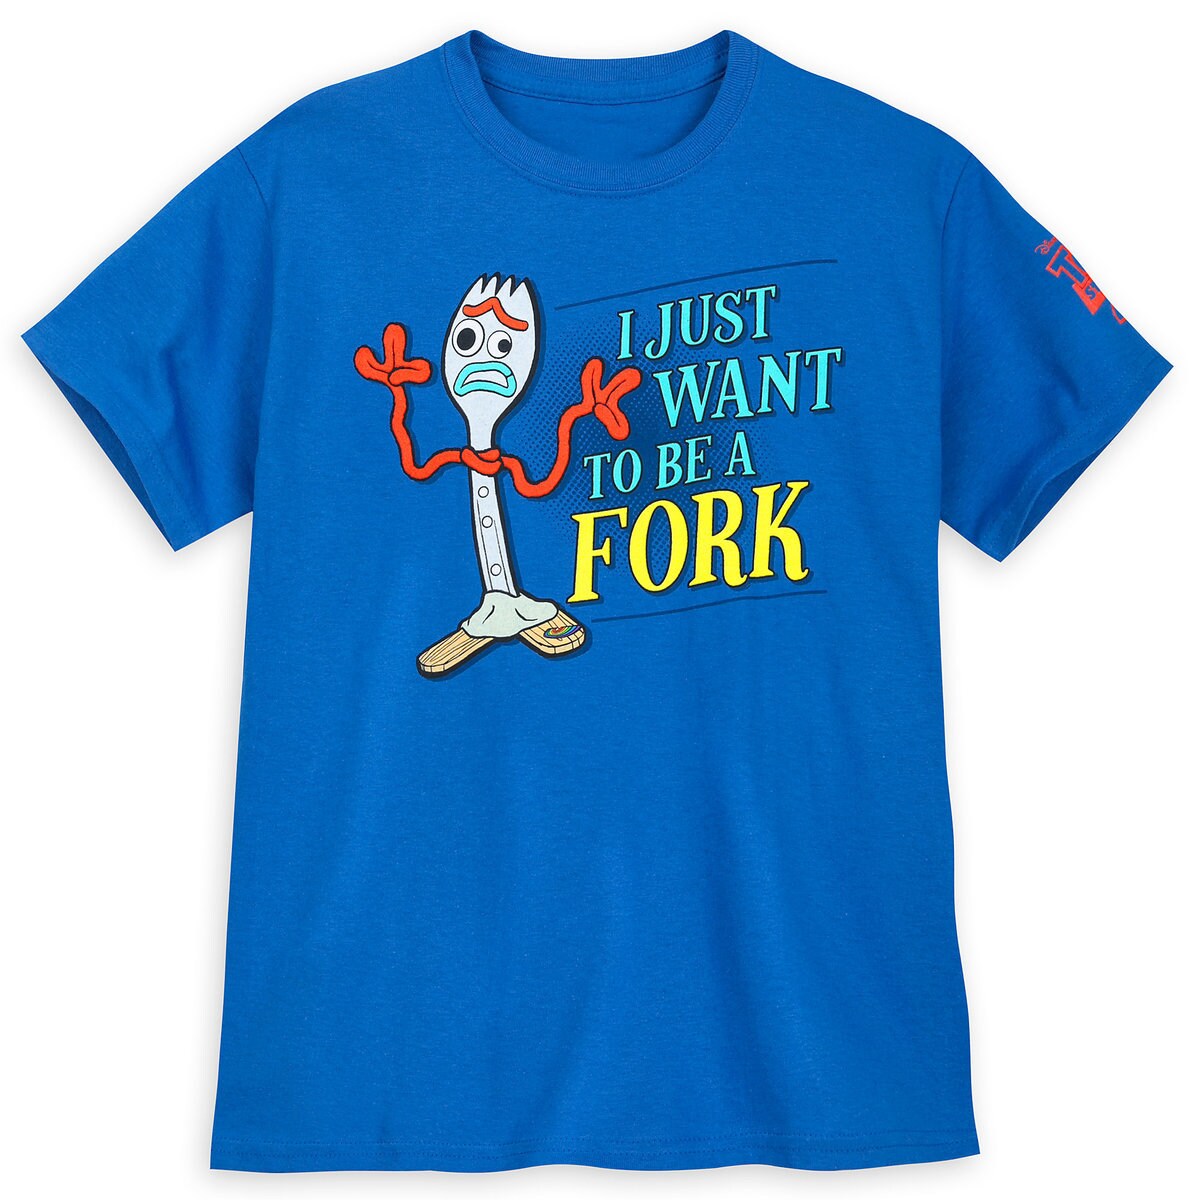 Product Image of Forky ''I Just Want to Be a Fork'' T-Shirt for Kids - Toy Story 4 # 1